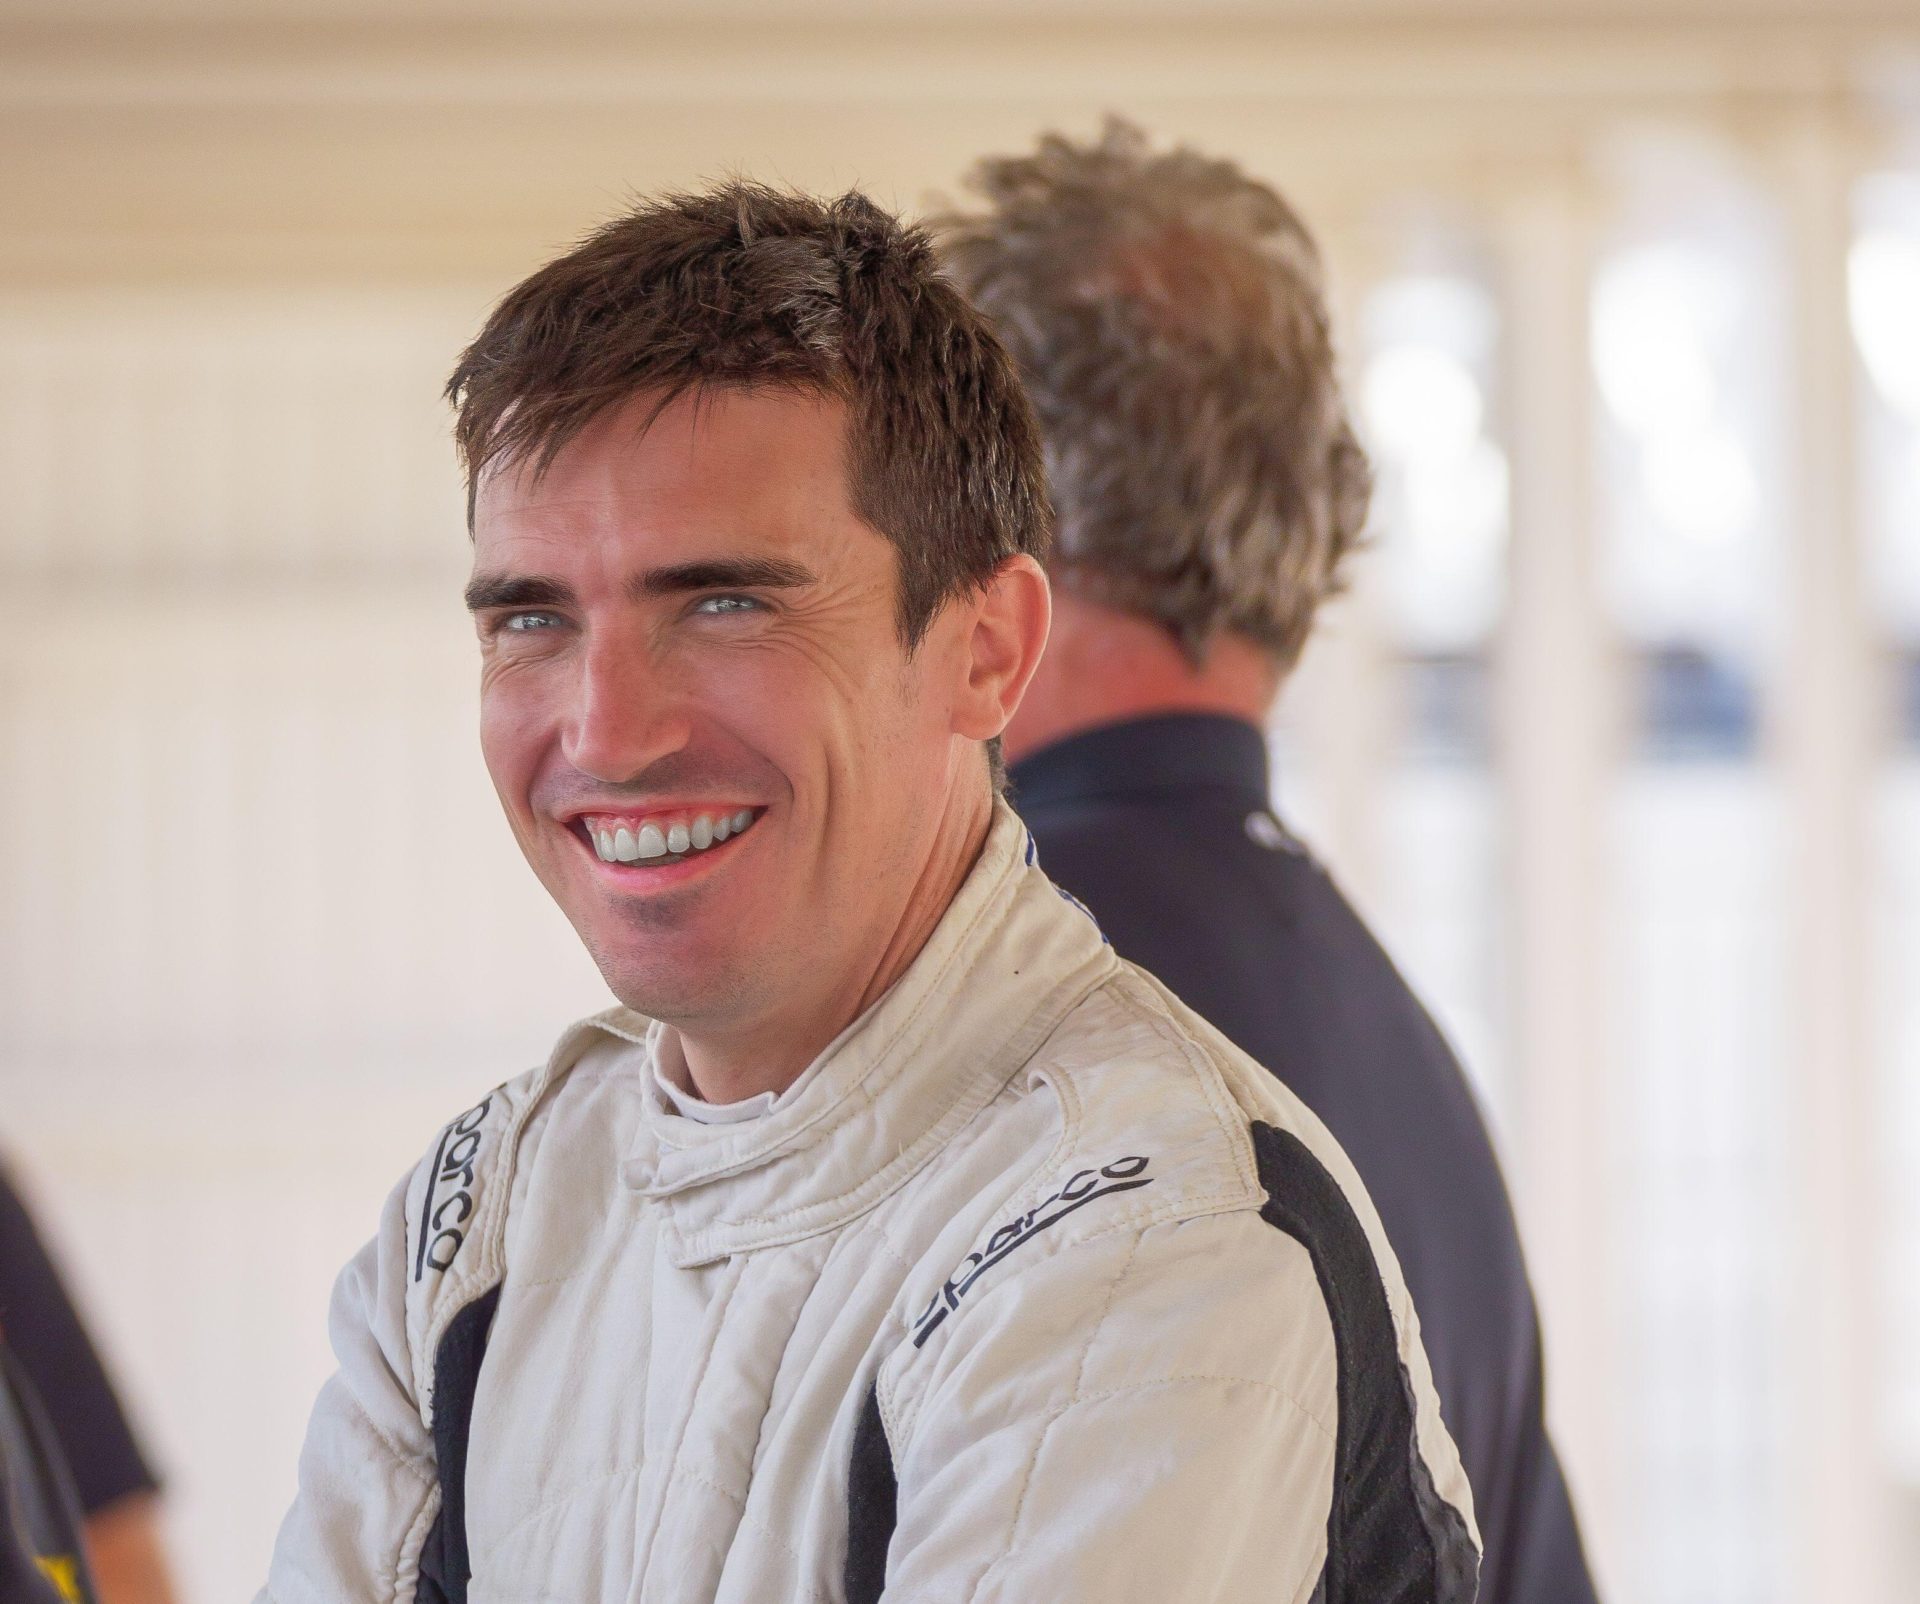 Craig Breen at the Goodwood Revival in August 2022 in England